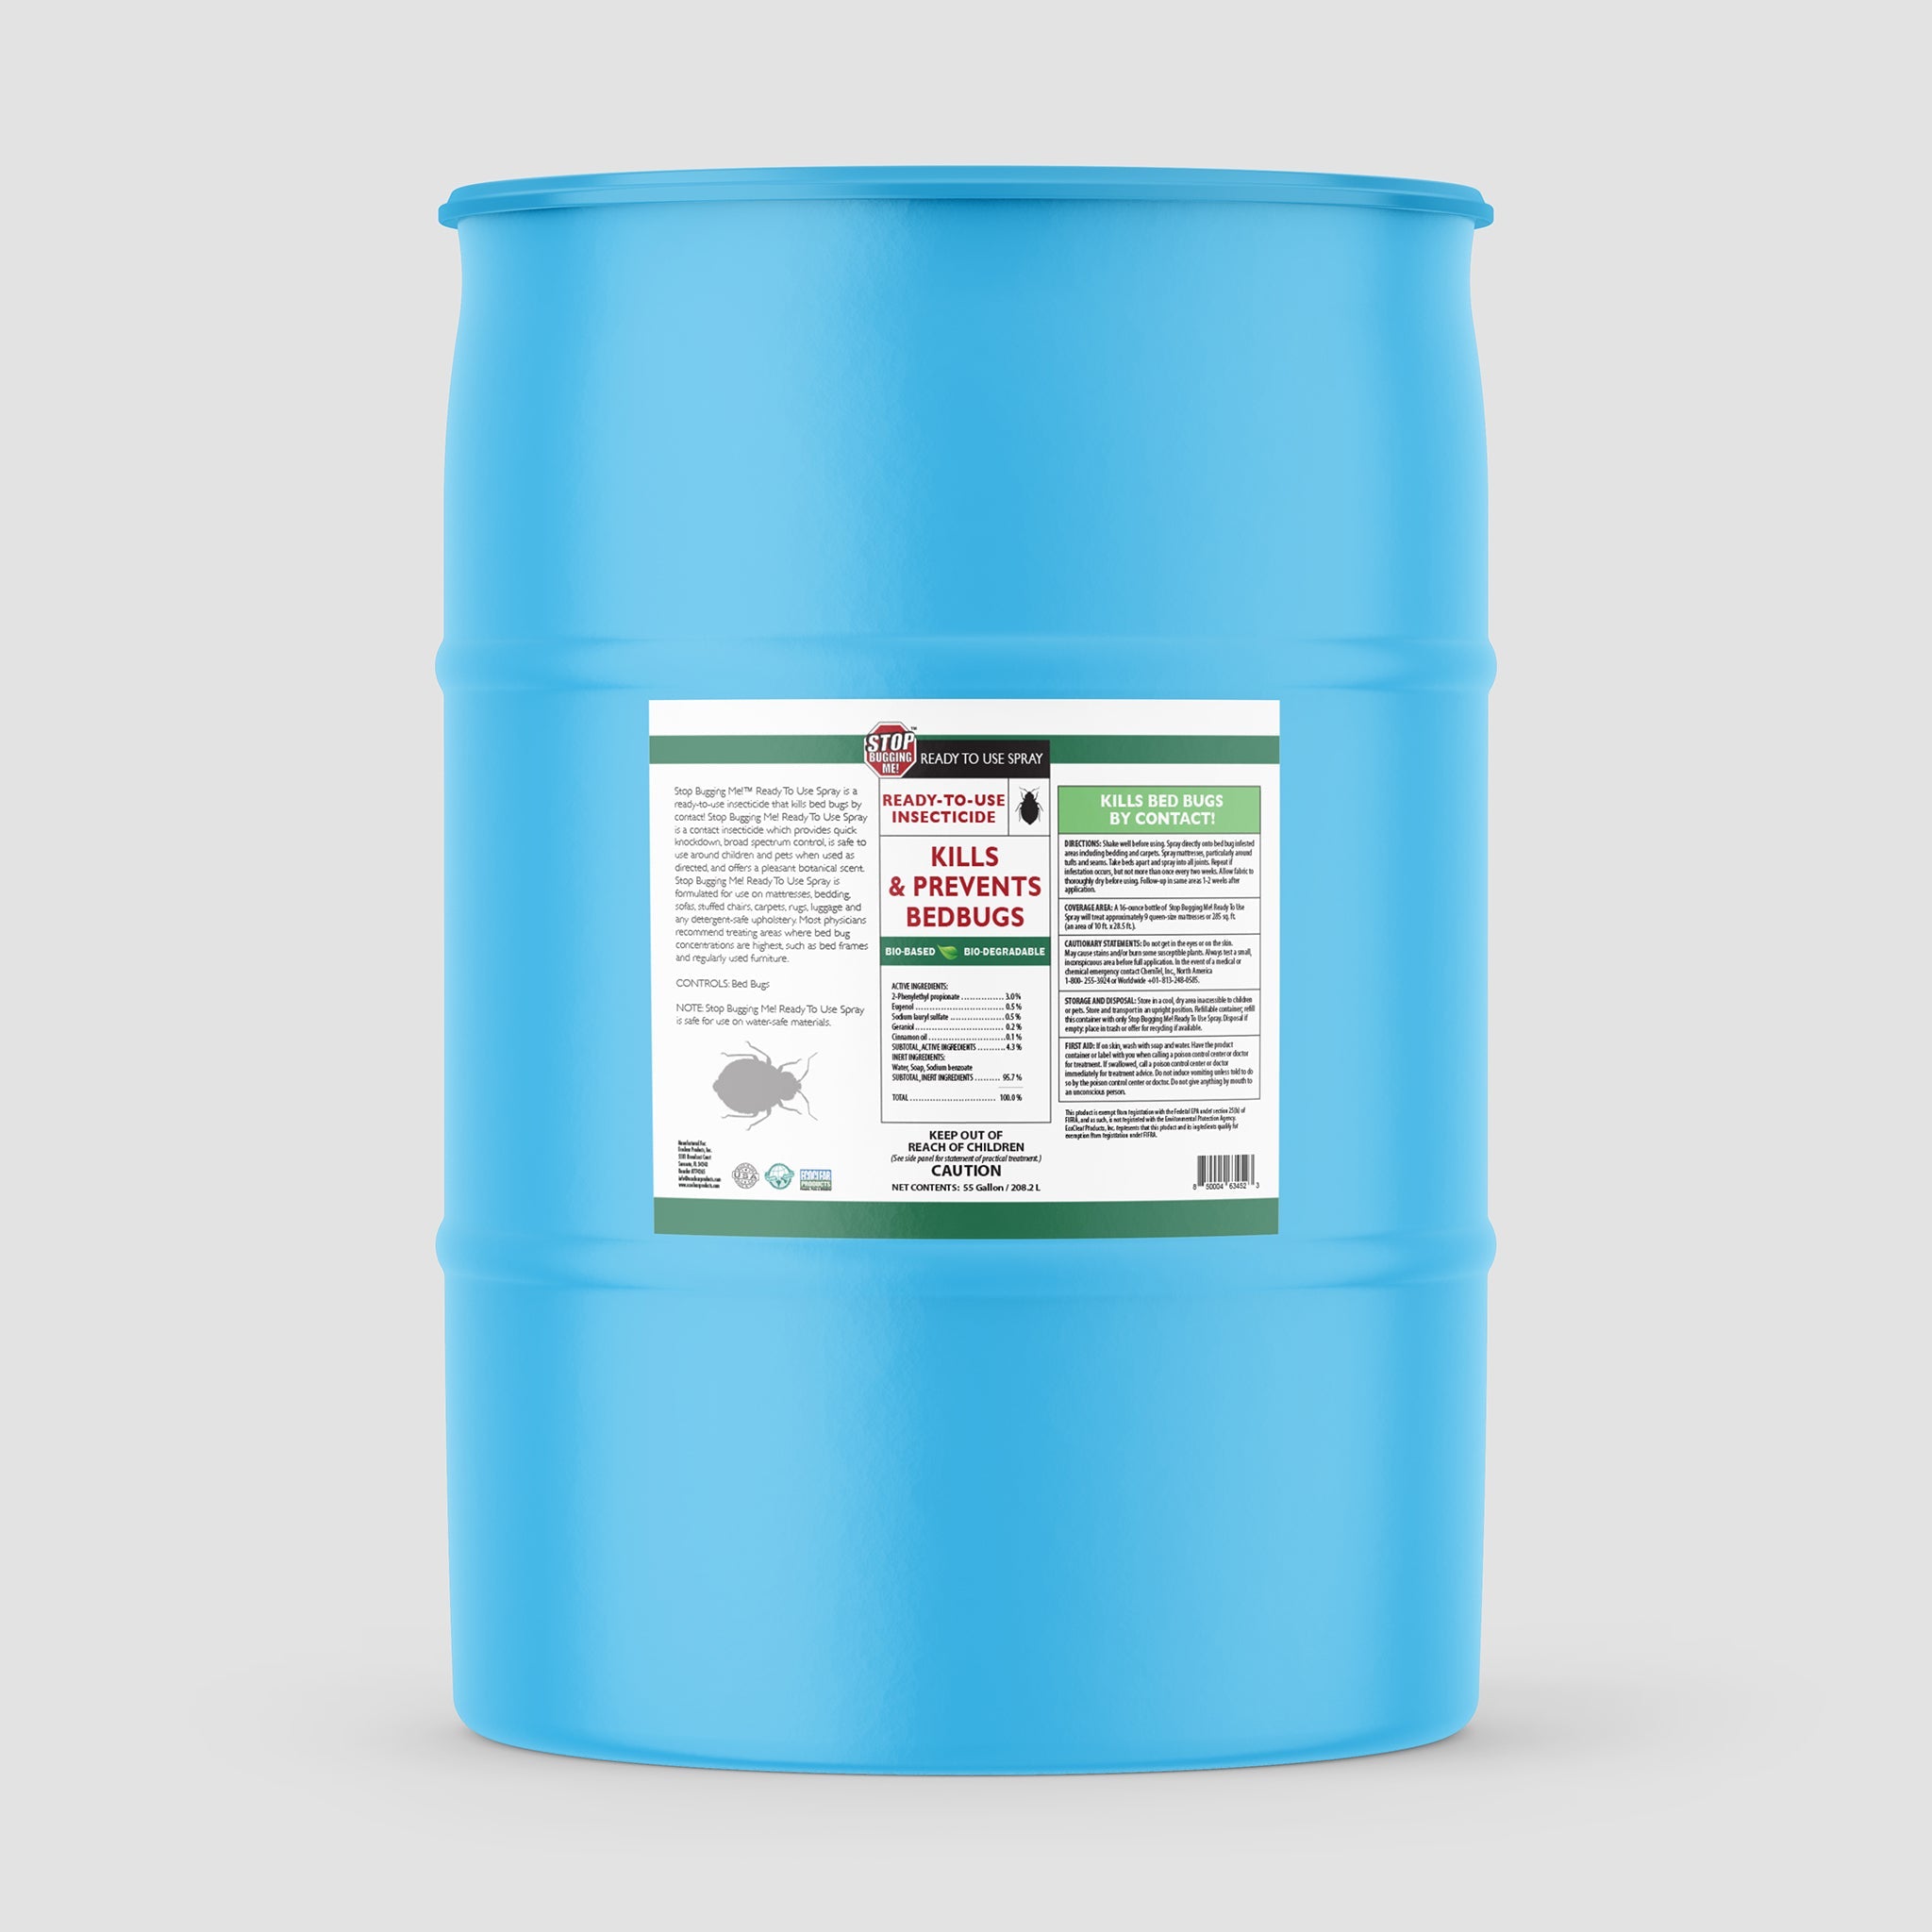 Stop Bugging Me!™ Ready To Use Spray 55 Gallon Drum